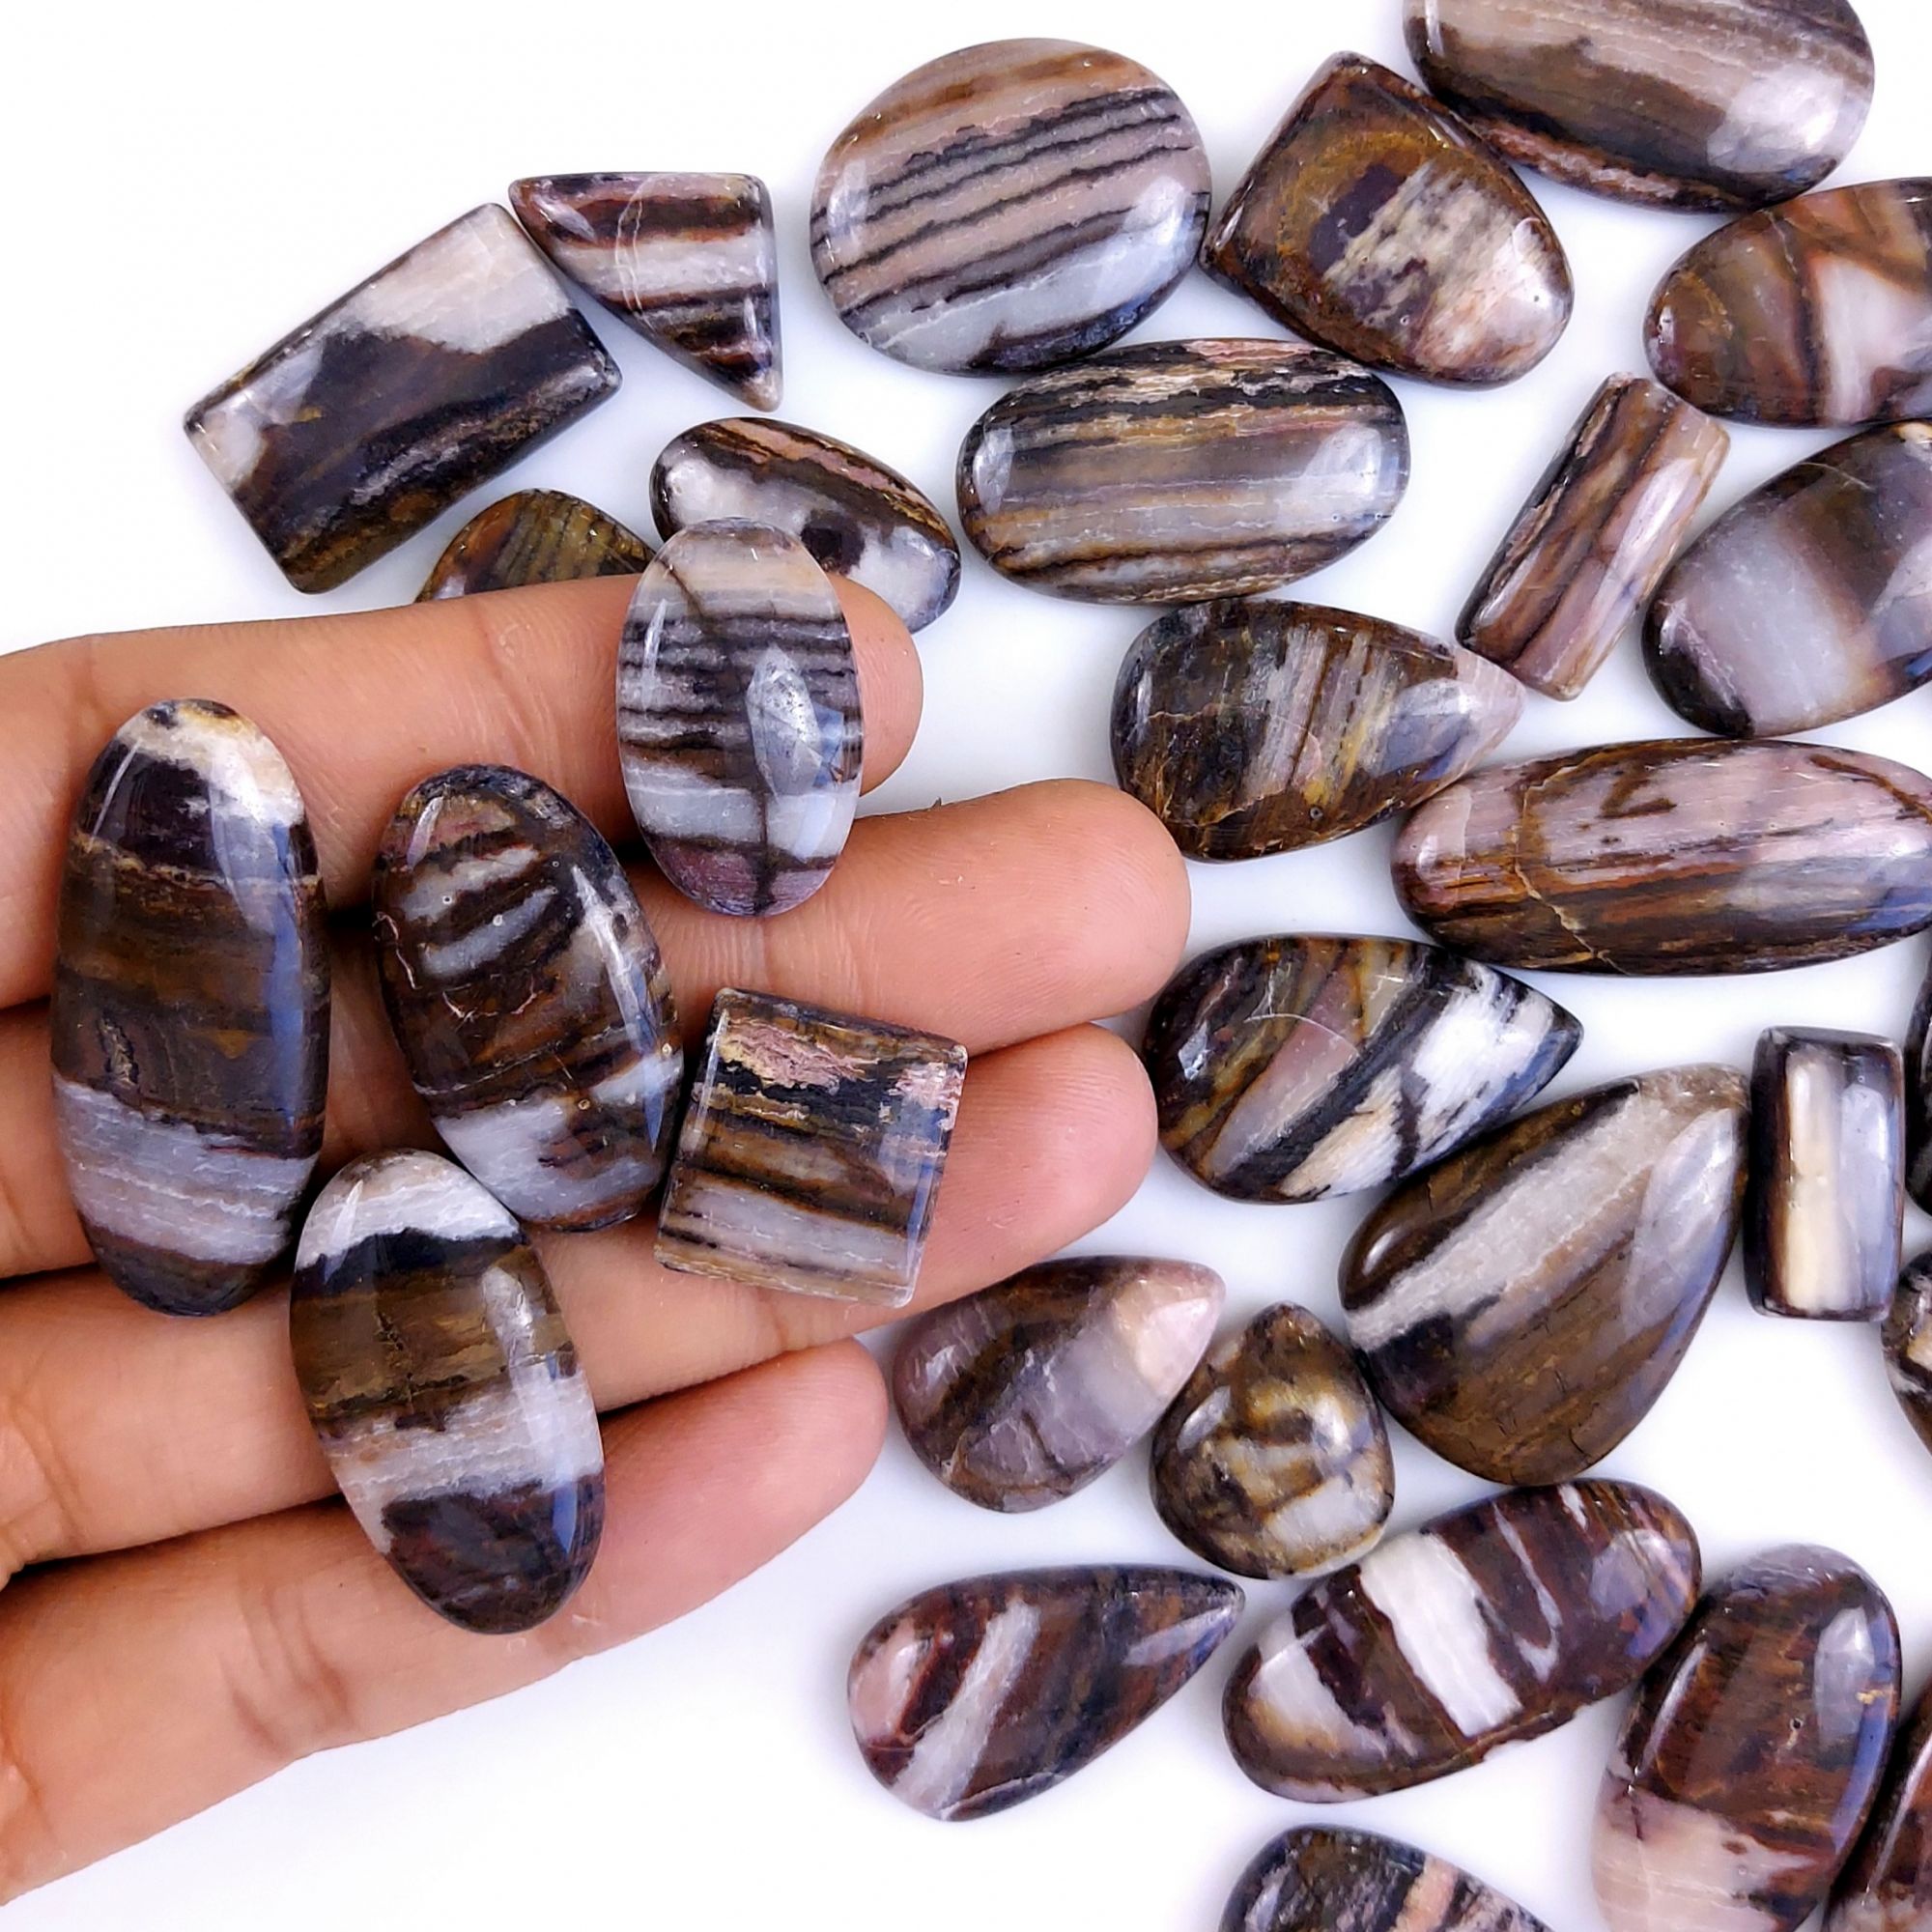 33Pcs 793Cts Natural Brown Banded Jasper Loose Cabochon Gemstone Lot  for Jewelry Making 38x16 18x14mm#1388